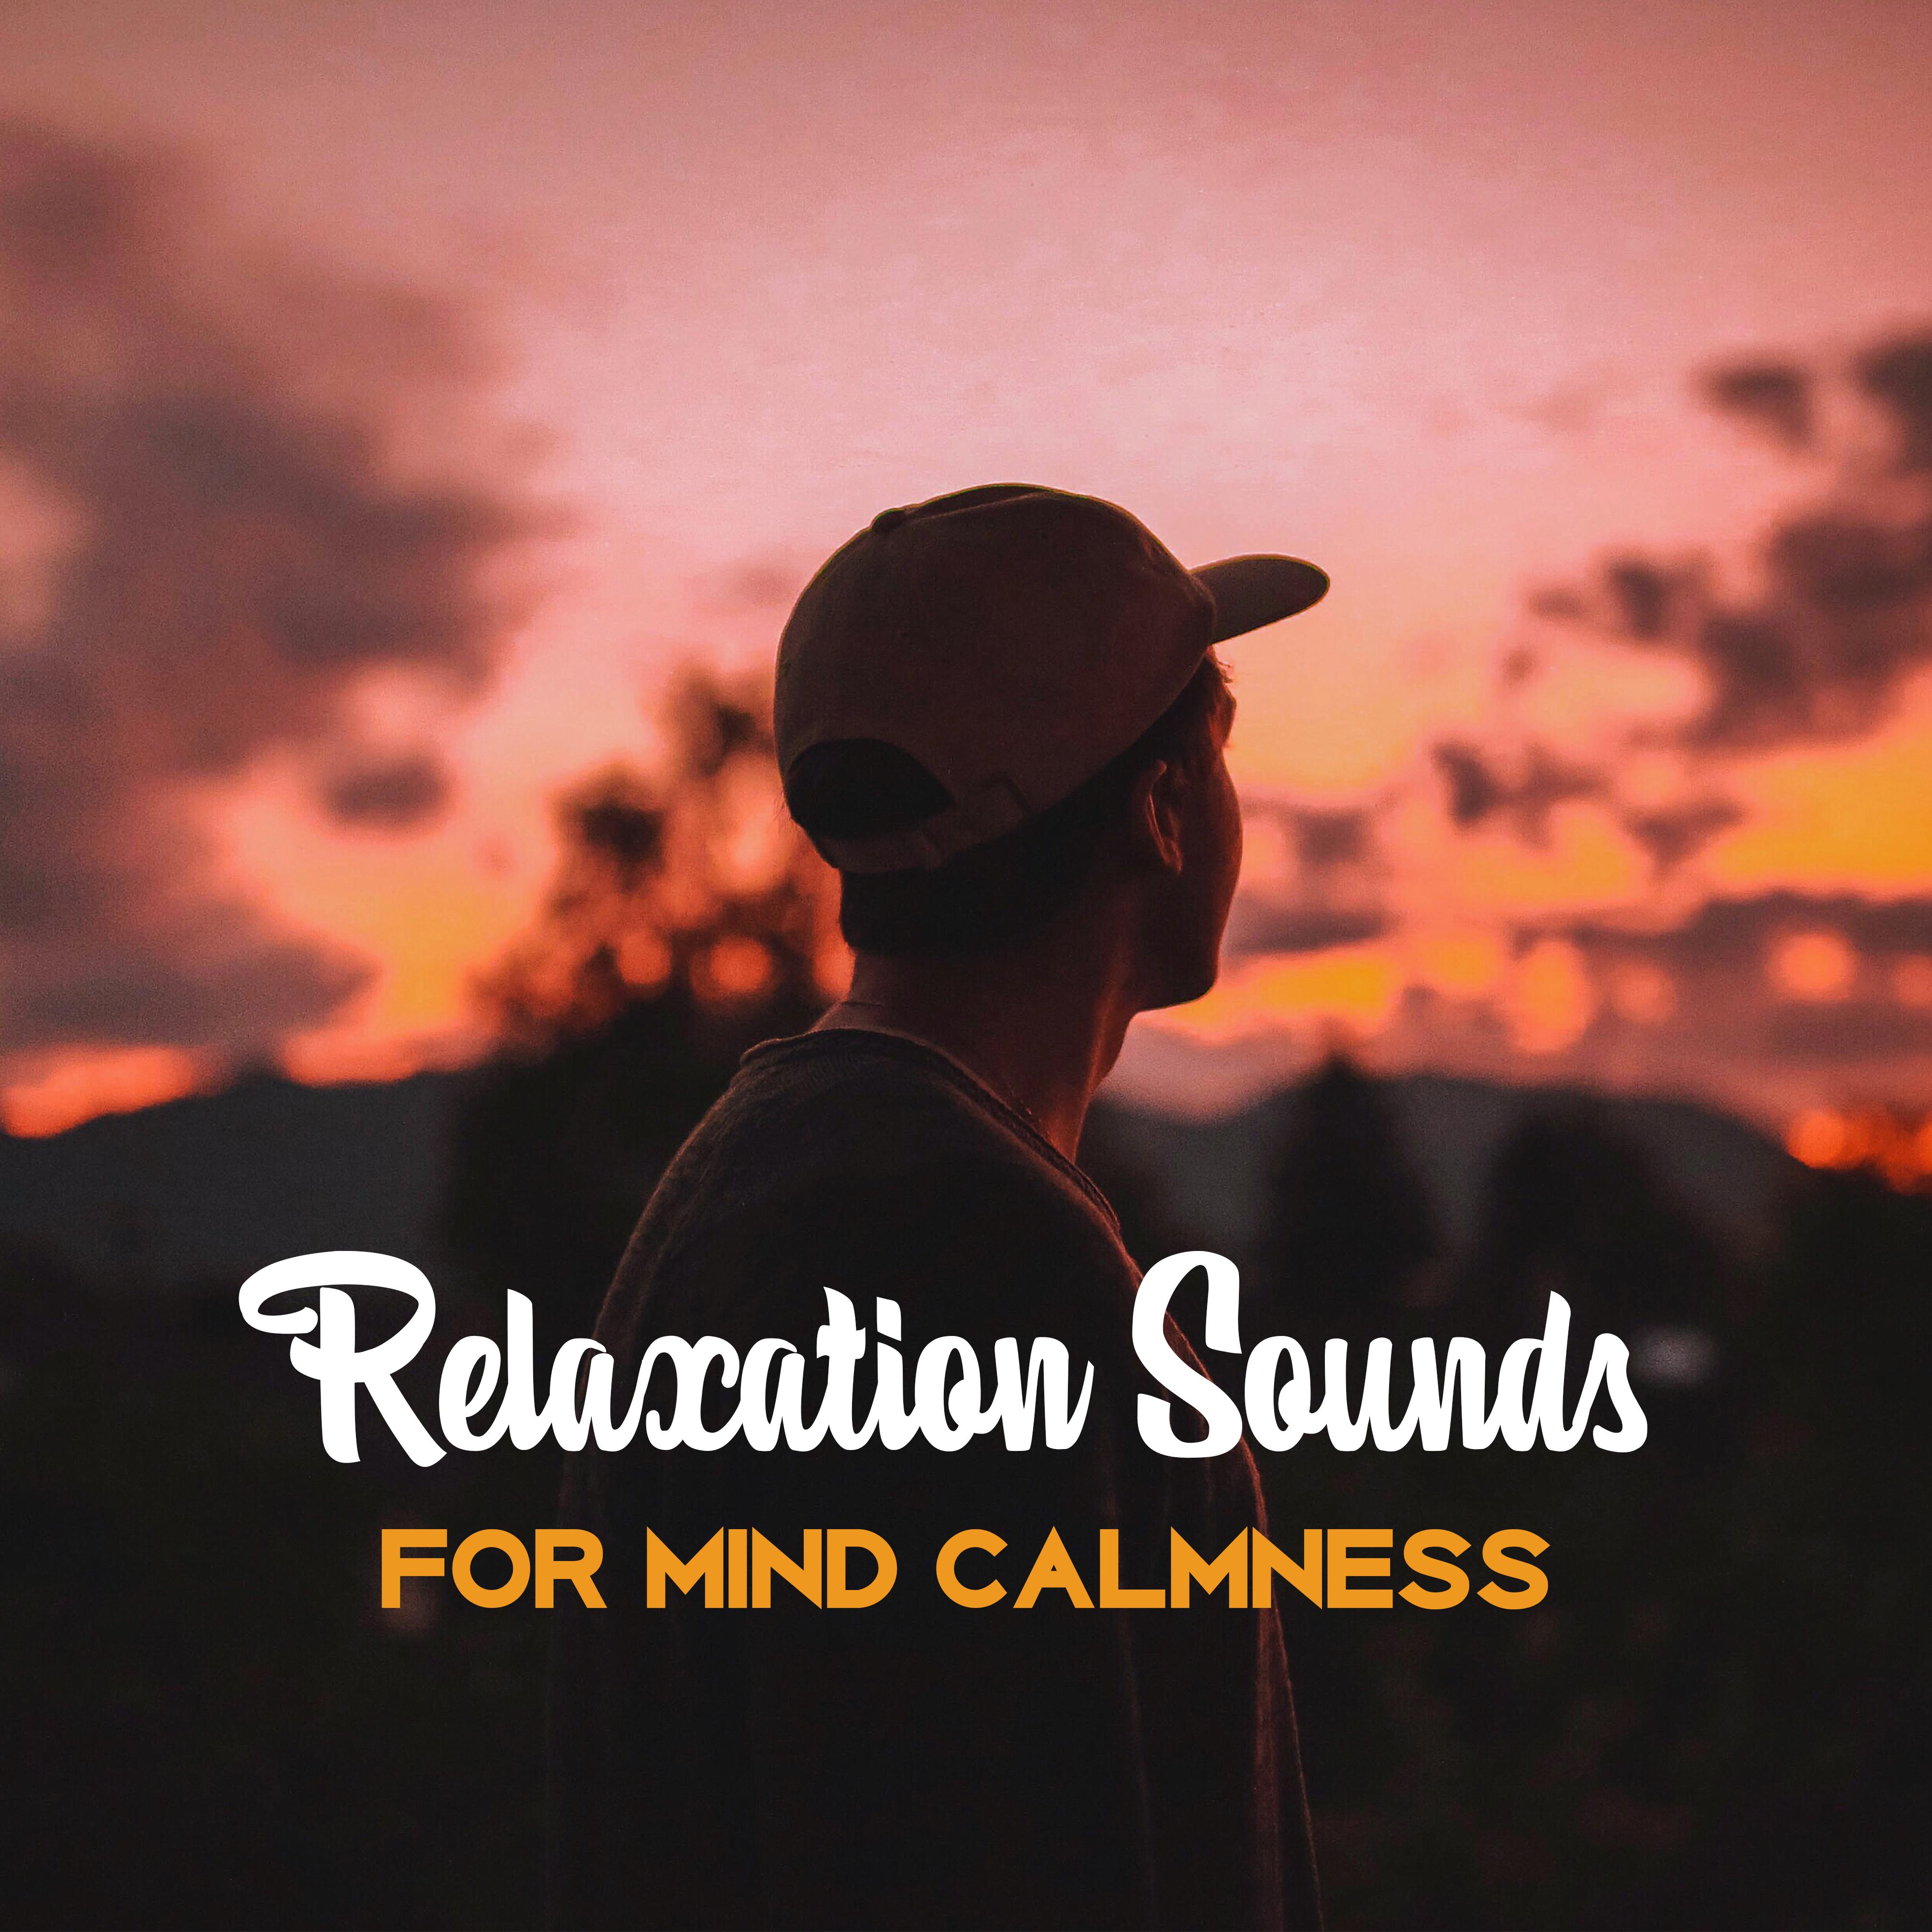 Relaxation Sounds for Mind Calmness – Soothing Sounds to Relax, New Age Music for Stress Relief, Time to Rest